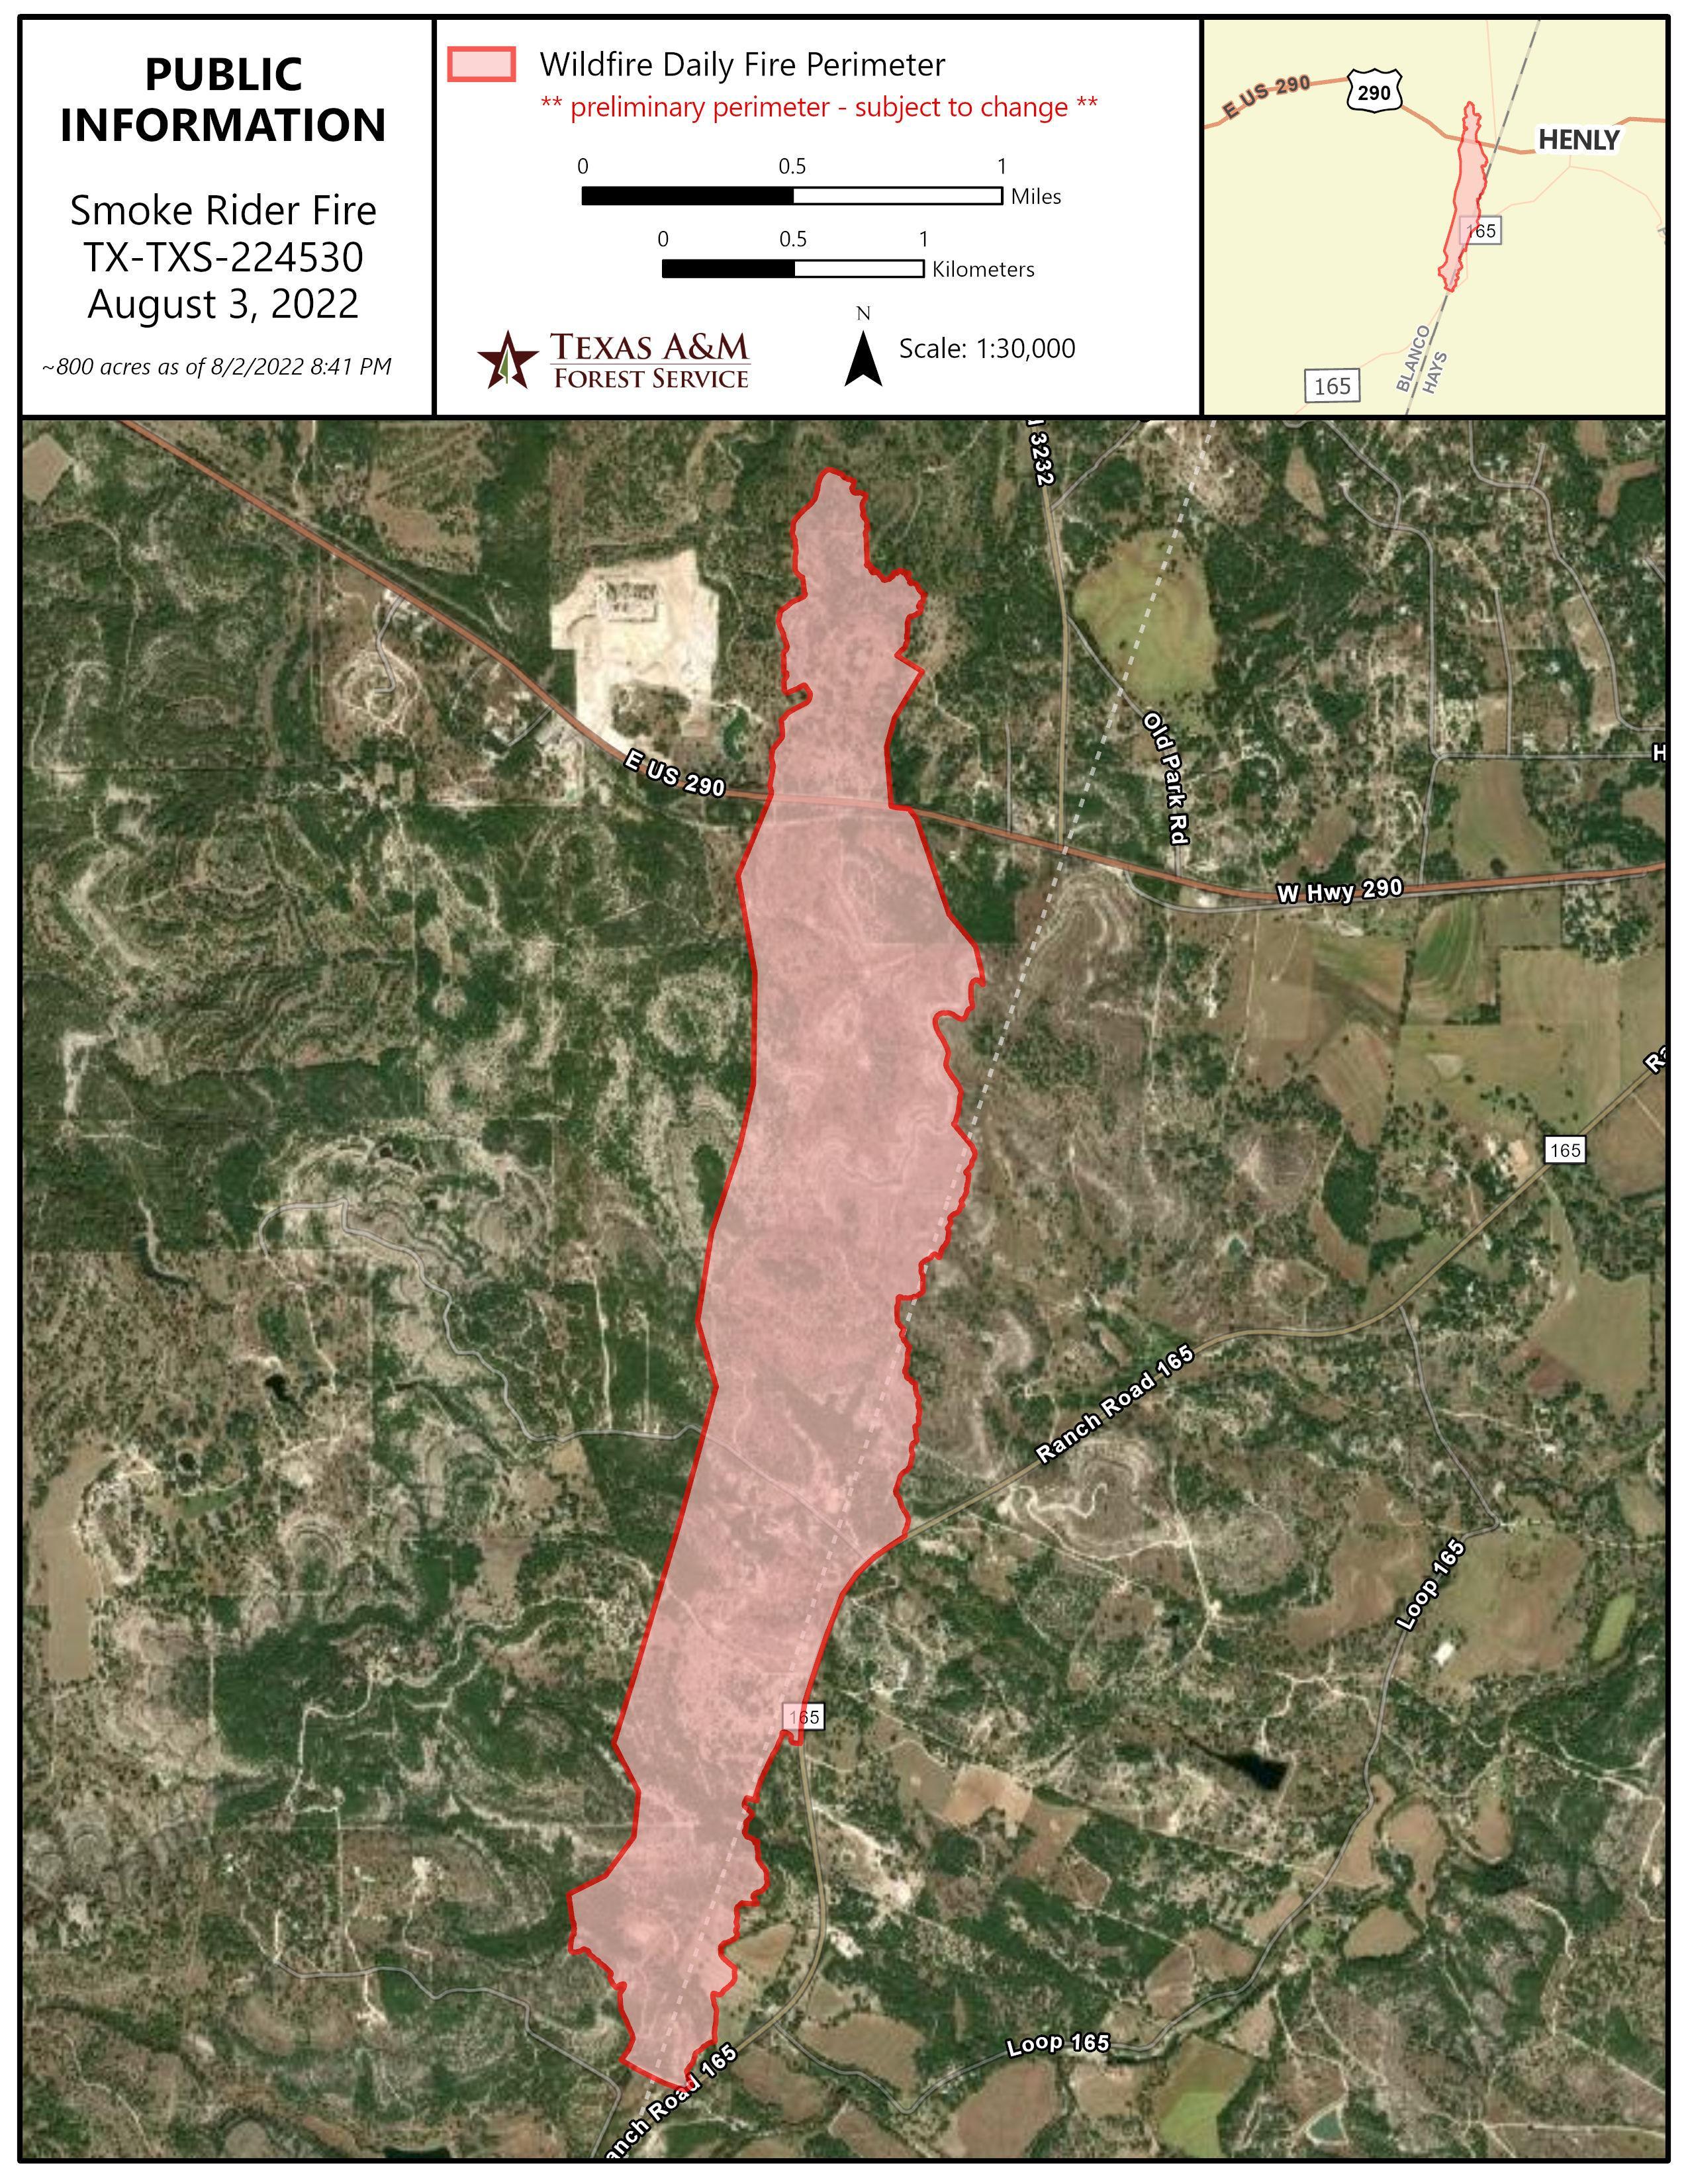 A public information map showing the perimeter map of the Smoke Rider Fire in Blanco and Hays County, Tx. The area the fire burned is shaded red.